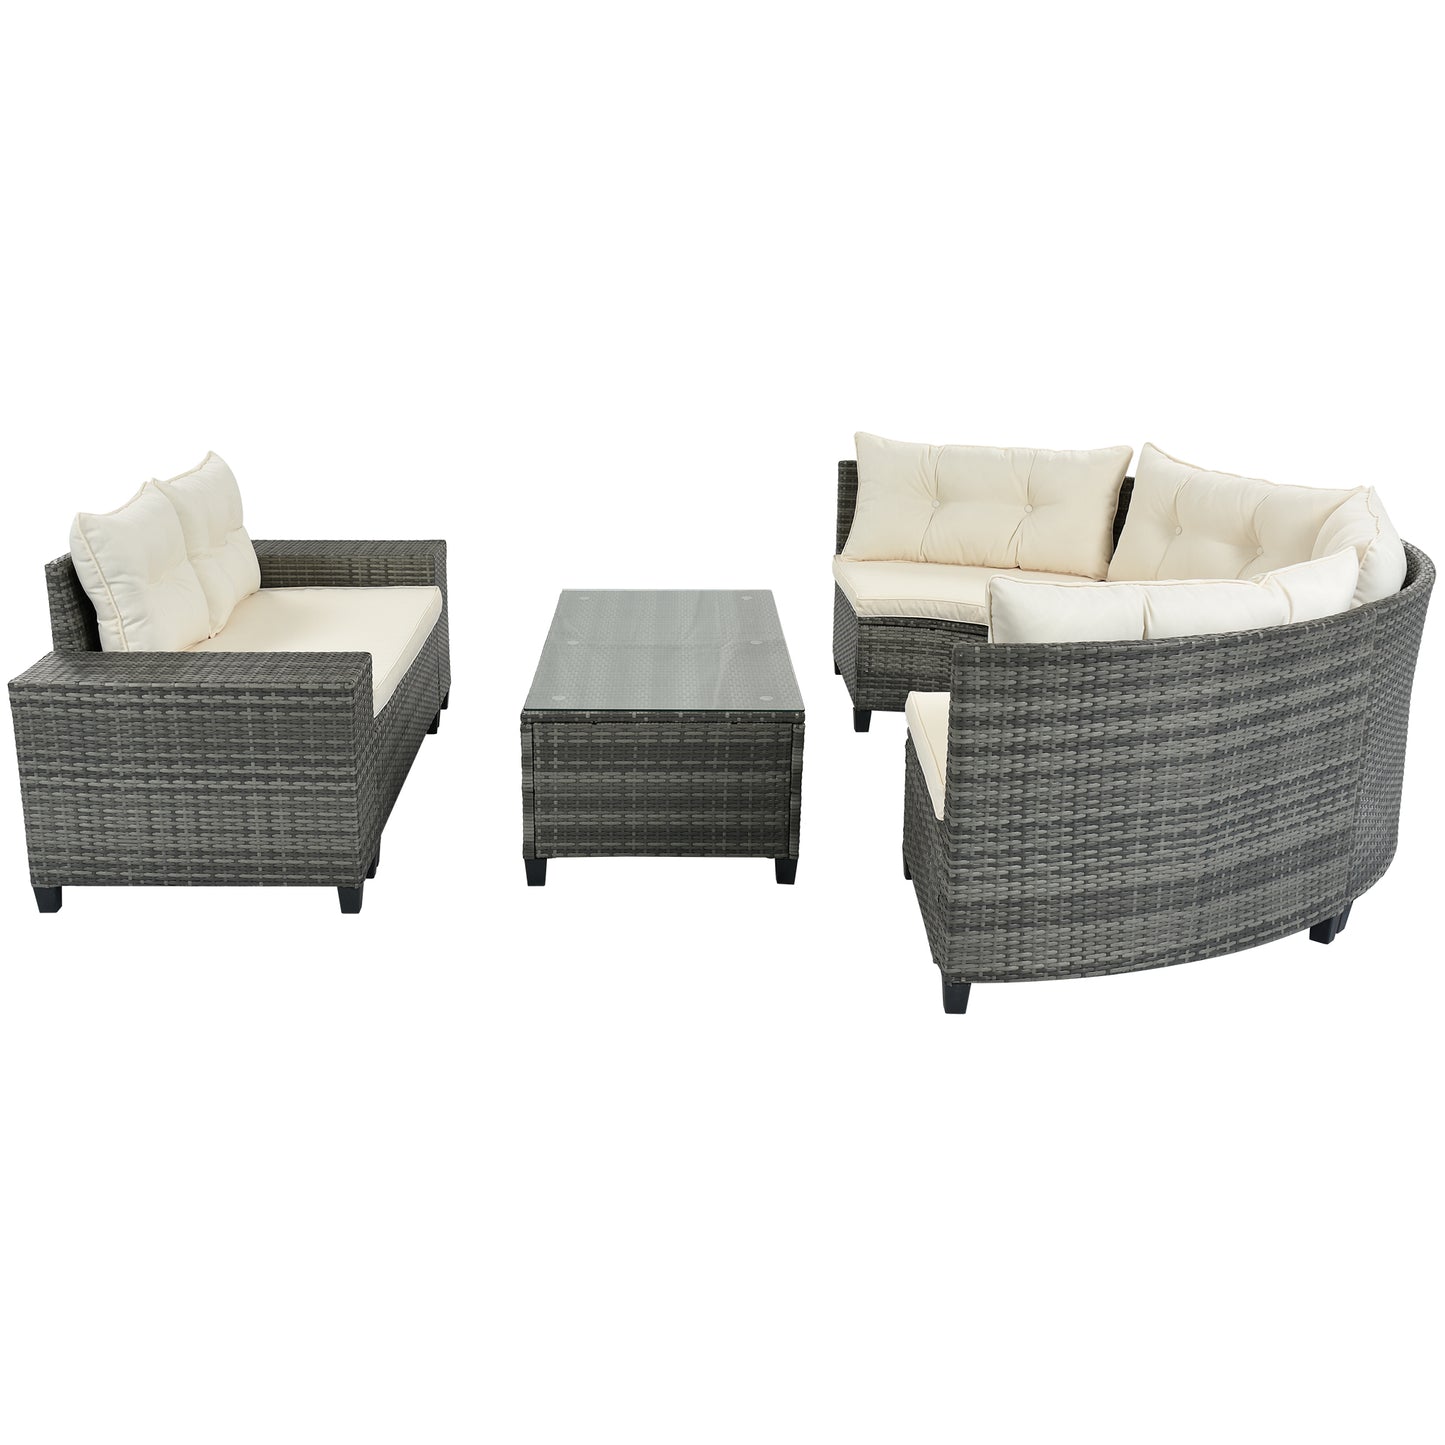 GO 8-pieces Outdoor Wicker Round Sofa Set, Half-Moon Sectional Sets All Weather, Curved Sofa Set With Rectangular Coffee Table, PE Rattan Water-resistant and UV Protected, Movable Cushion, Beige